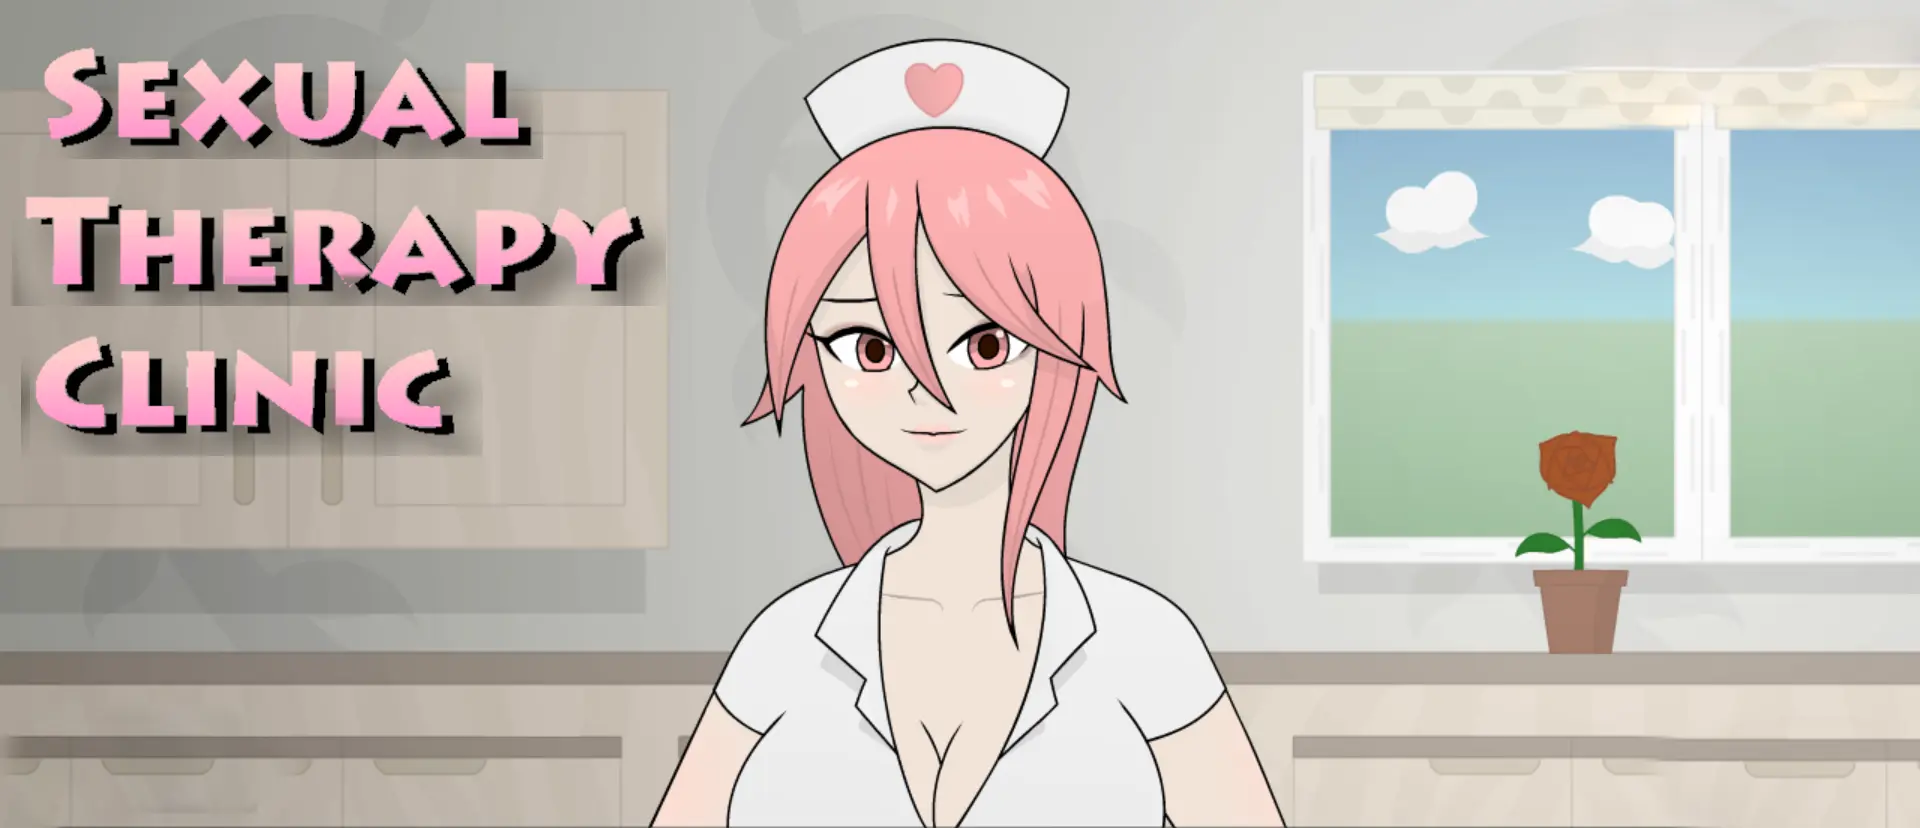 Sexual Therapy Clinic (Editable Bundle) [v1.1] main image